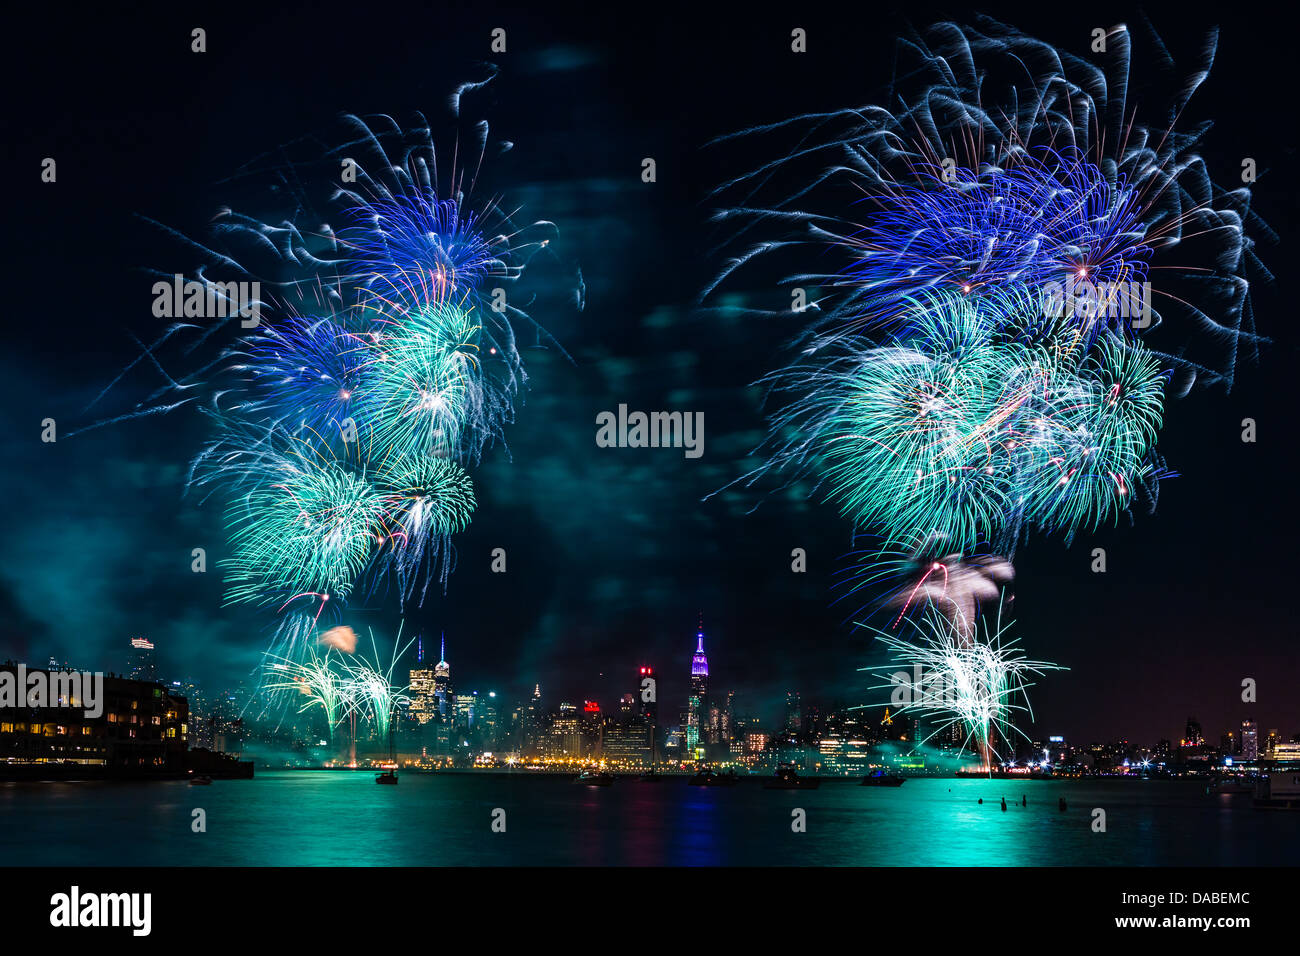 Macy's 4th of July fireworks on the Hudson river with the Manhattan skyline and the Empire State Building in the background Stock Photo